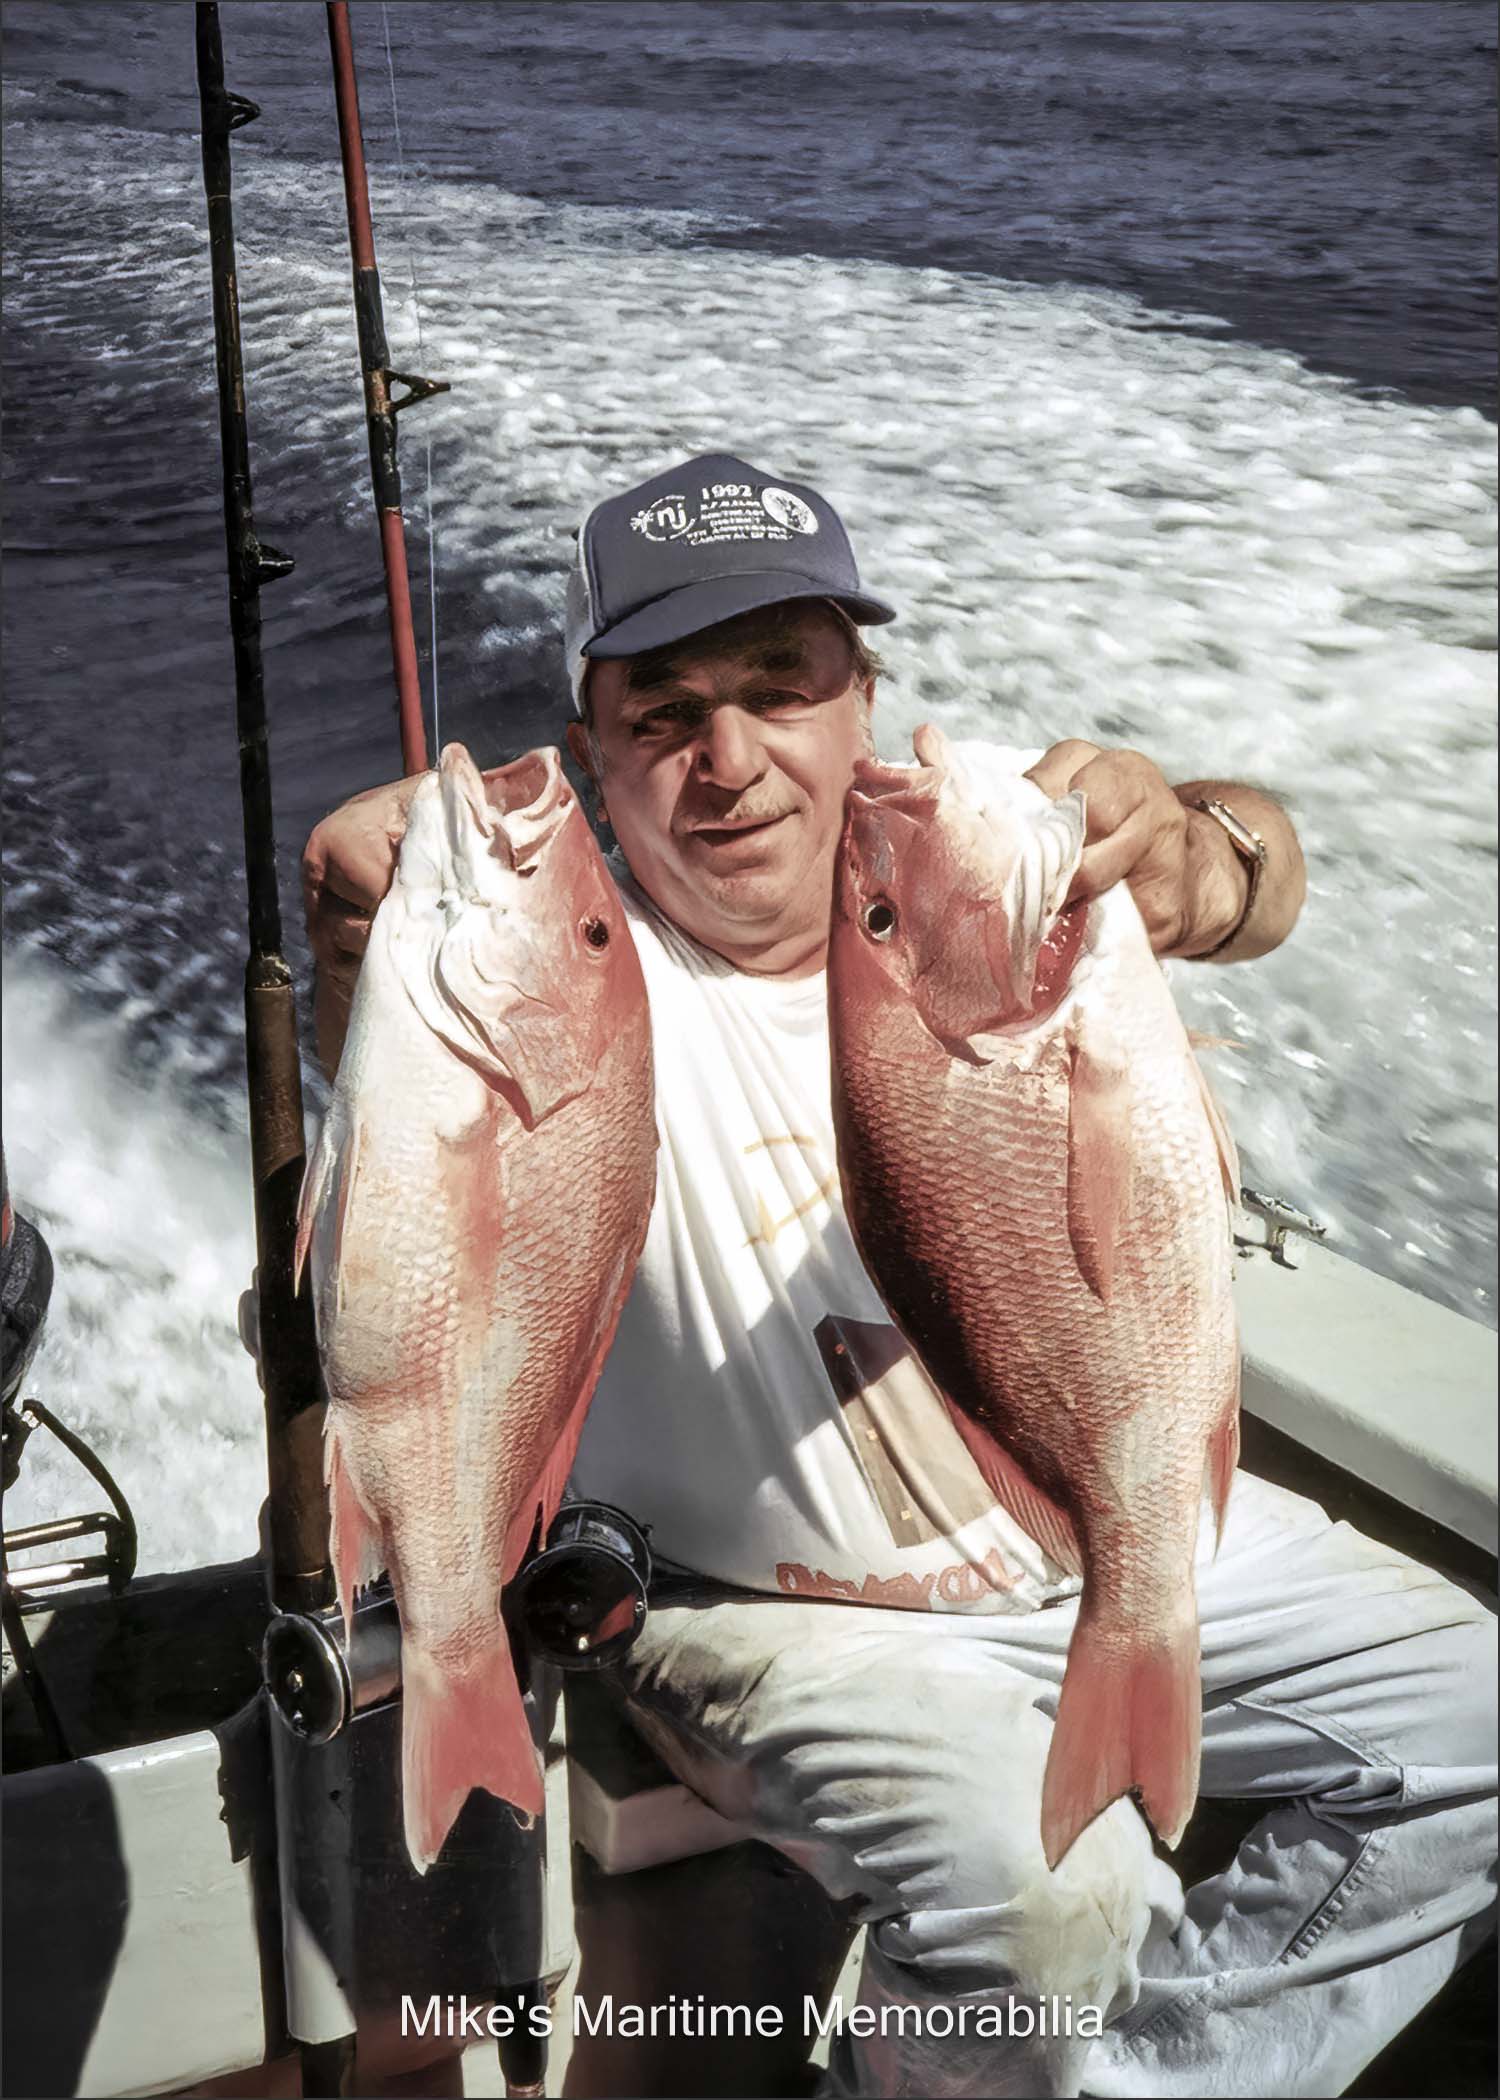 Captain Mickey fishing in Florida Captain Mickey holds up a nice pair of Snapper on the way back from a fishing trip. The photo is courtesy of Captain Dave Bogan Sr.